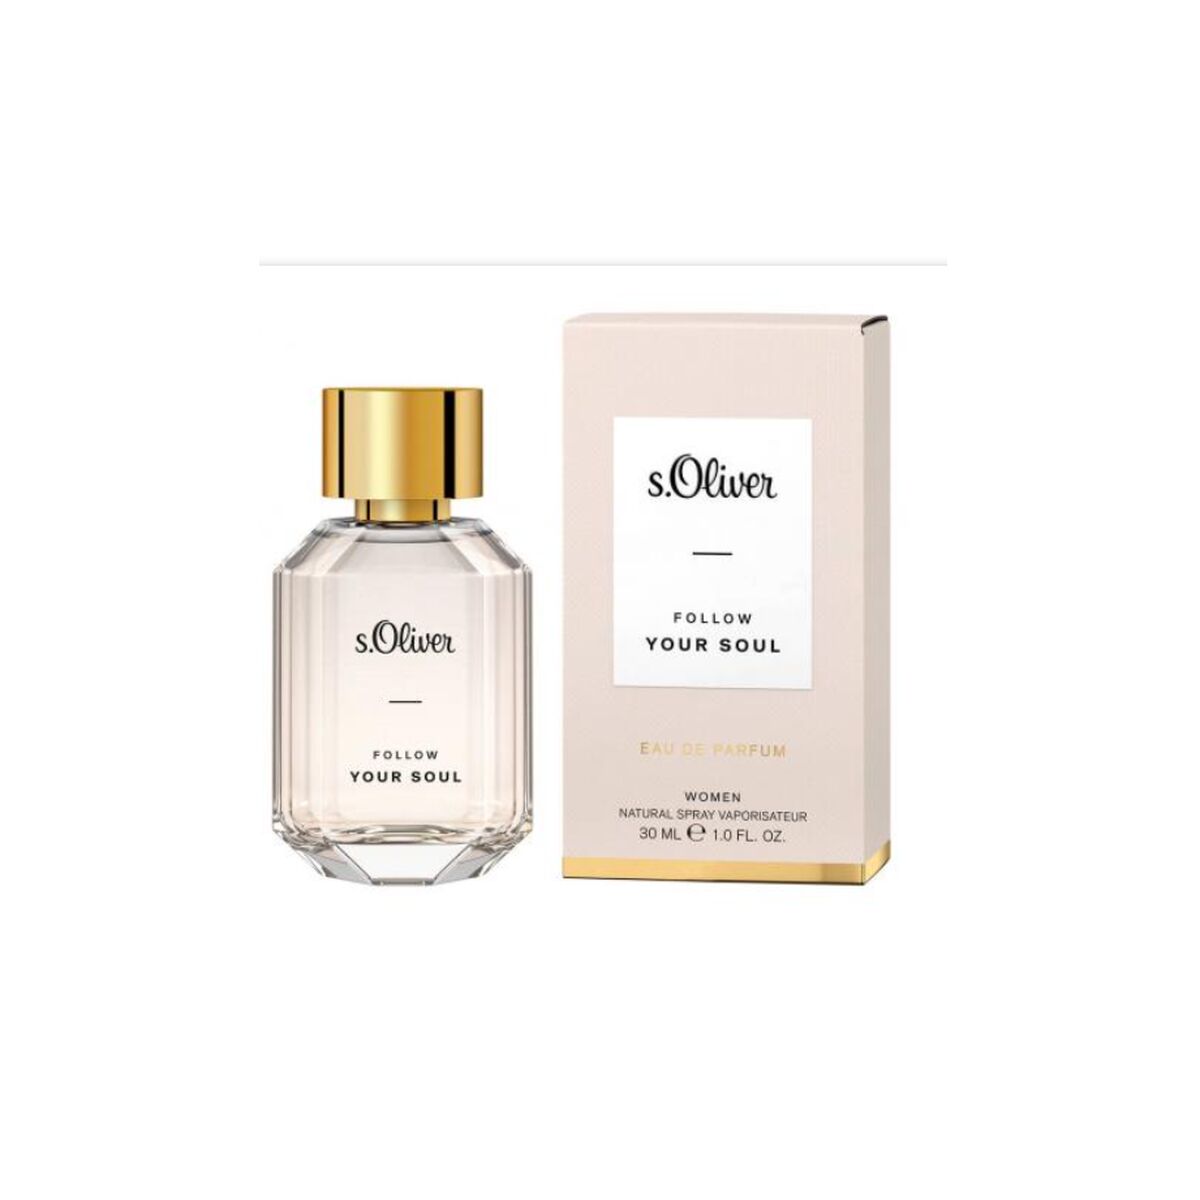 Women's Perfume s.Oliver Follow Your Soul 30 ml